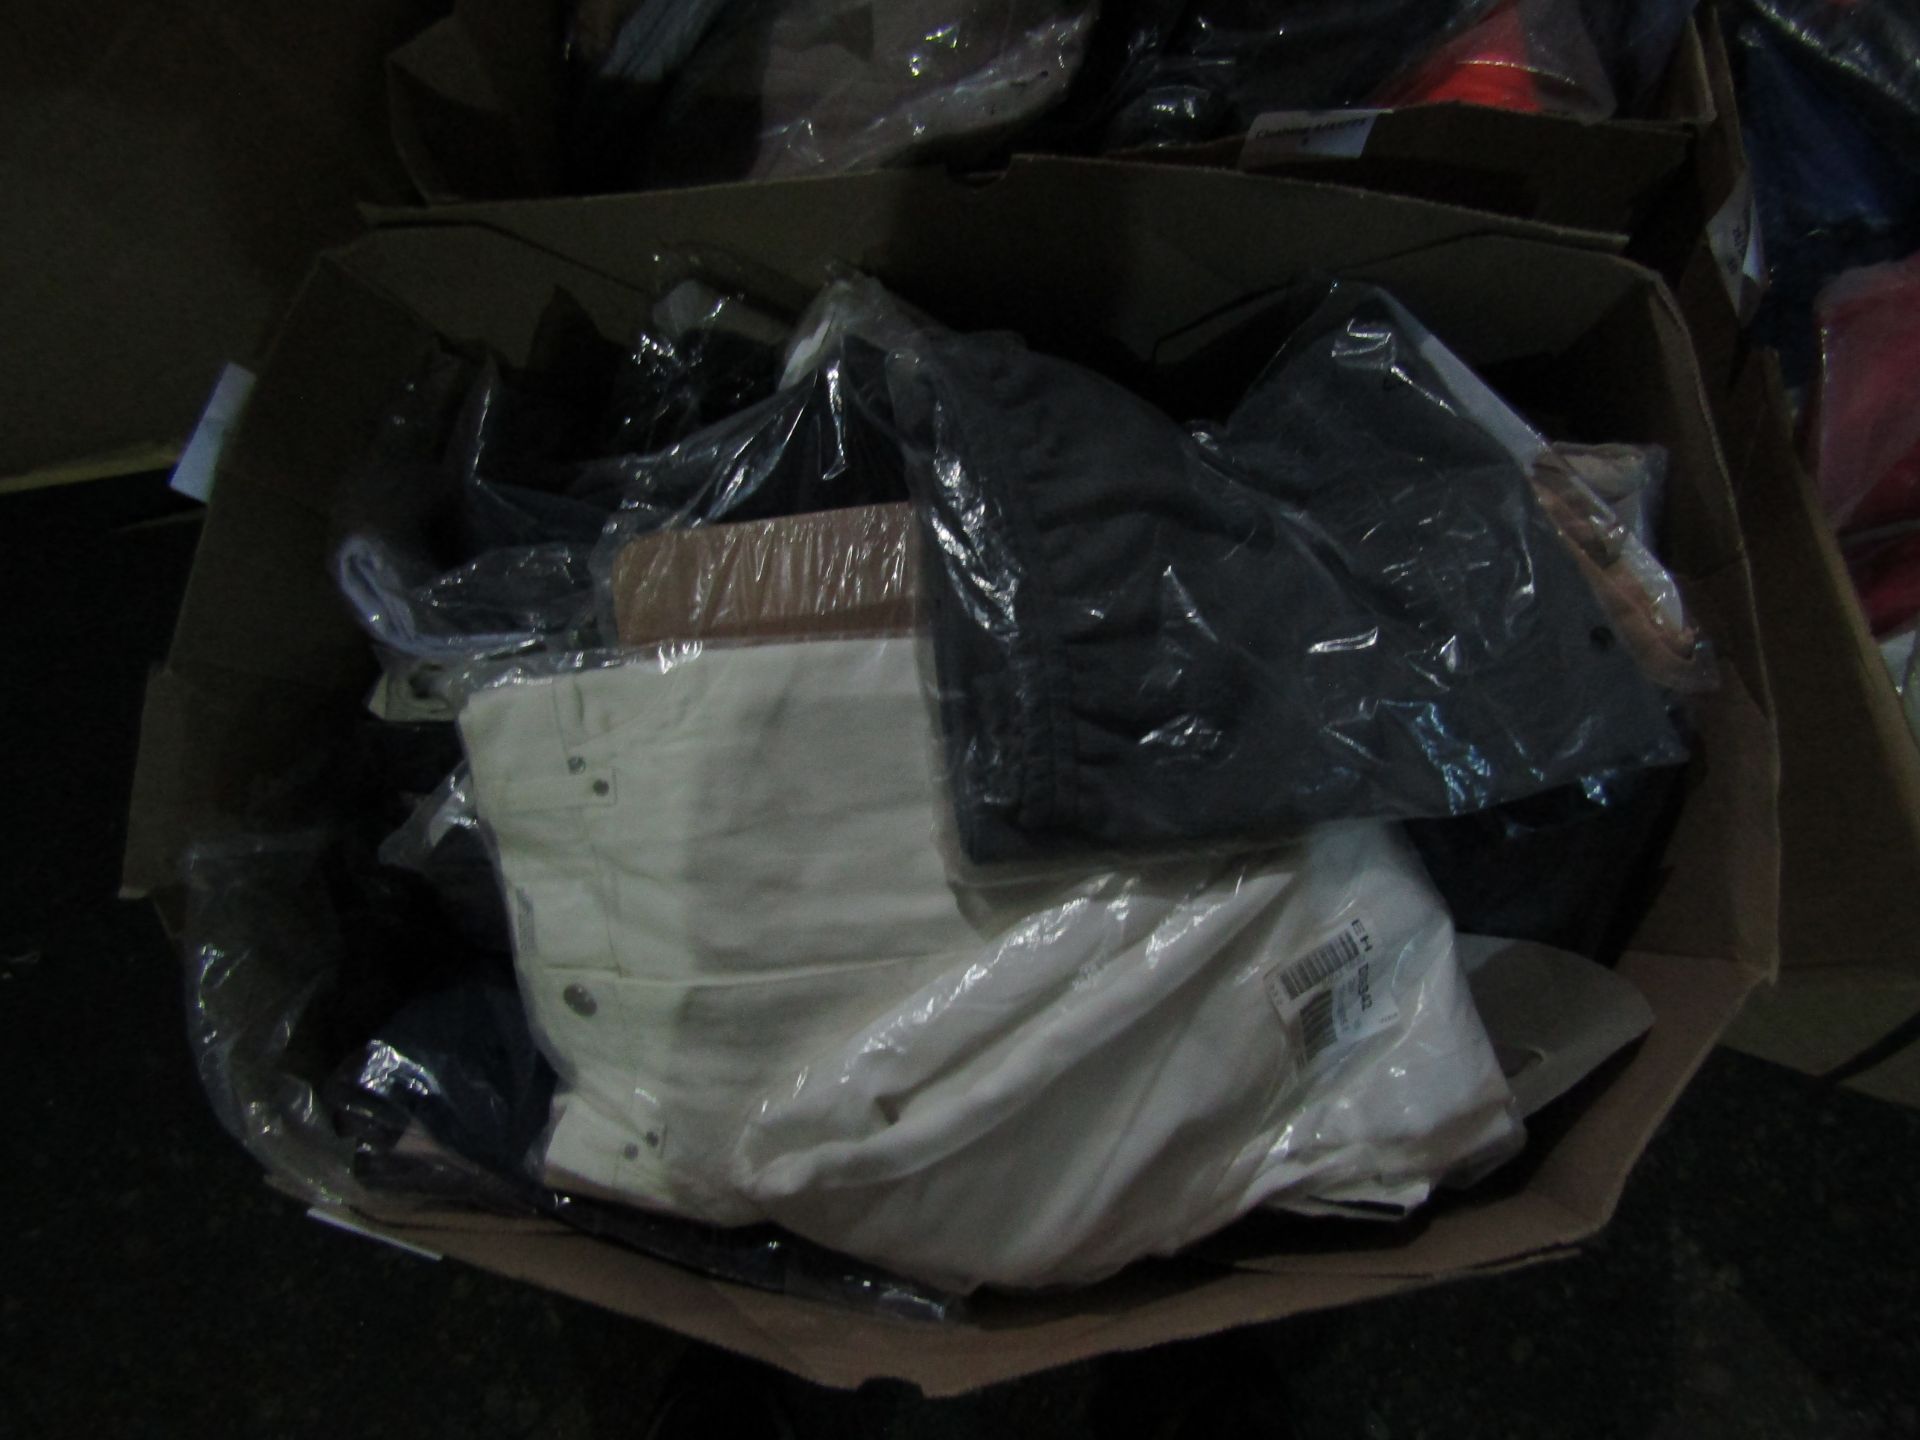 Box of approx 35-40 items of clothing, containing tops/blouse